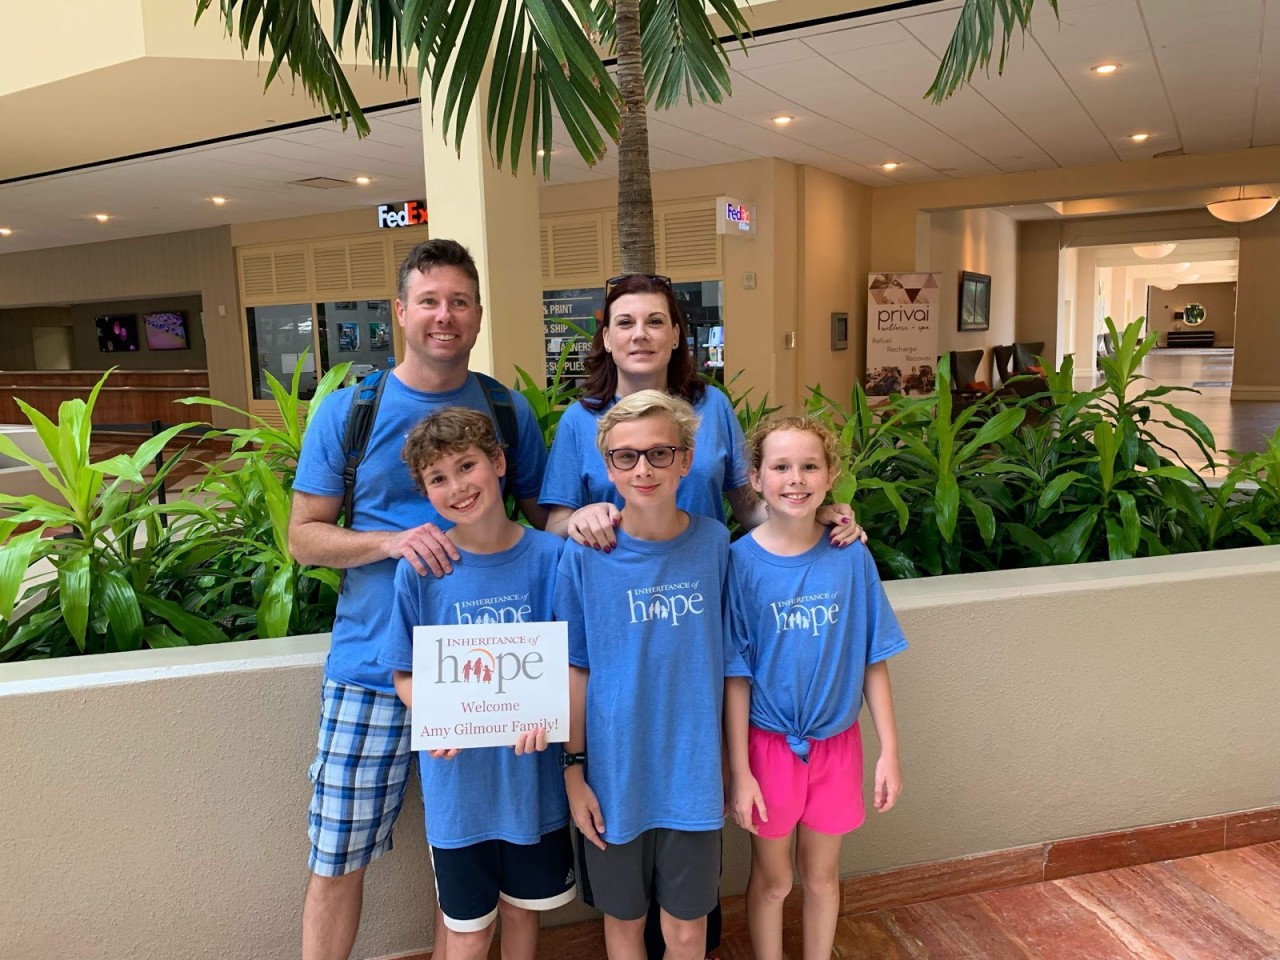 The Gilmour family arrived at their Orlando retreat ready for carefree family time together, but did not expect to gain a new family--a bonus that has lasted beyond their trip.